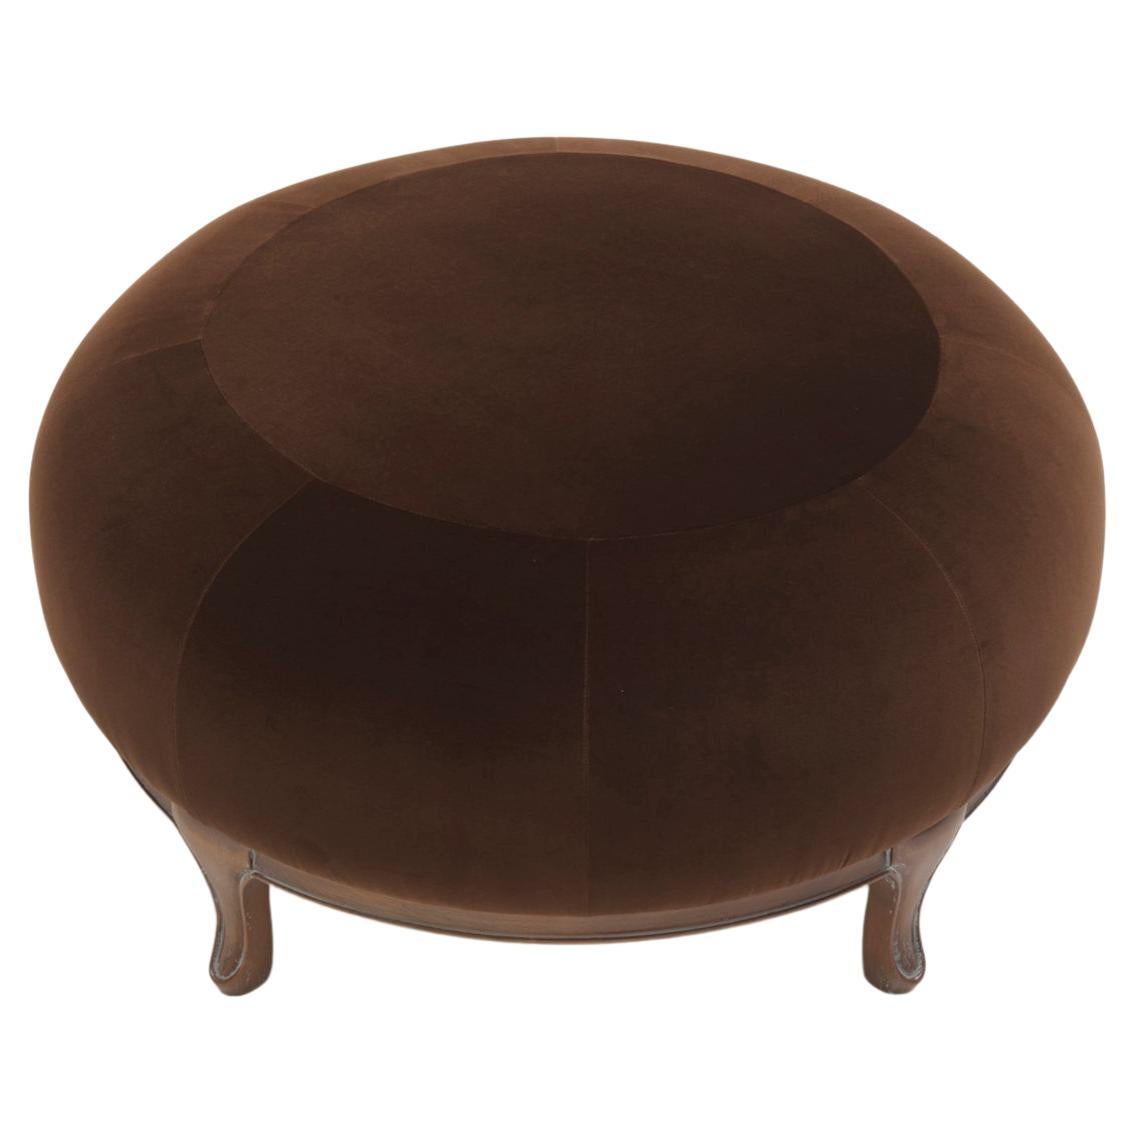 PLUMP/P Upholstered Brown Pouf in Solid Walnut Wood and Cotton Velvet For Sale